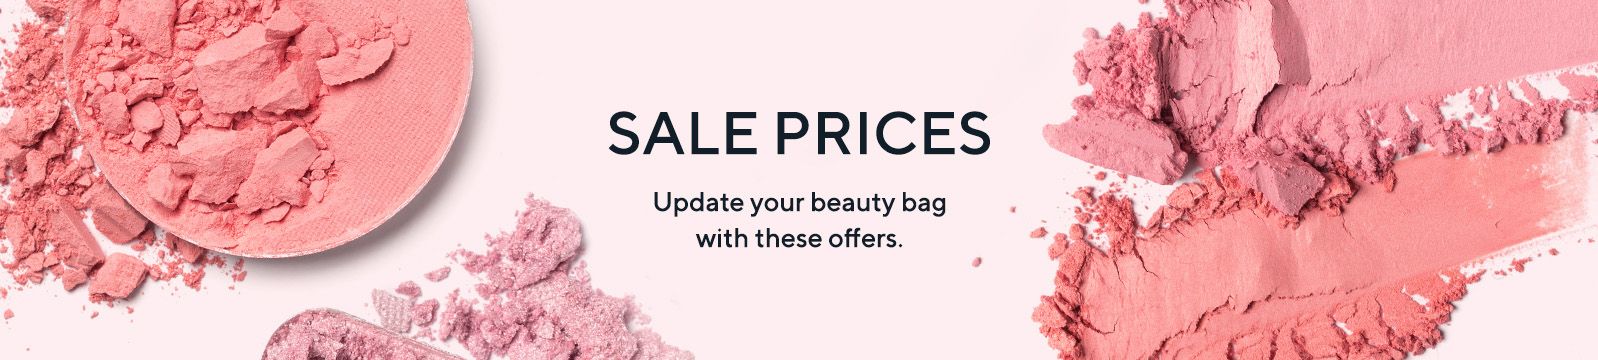 Sale Prices.  Update your beauty bag with these offers.